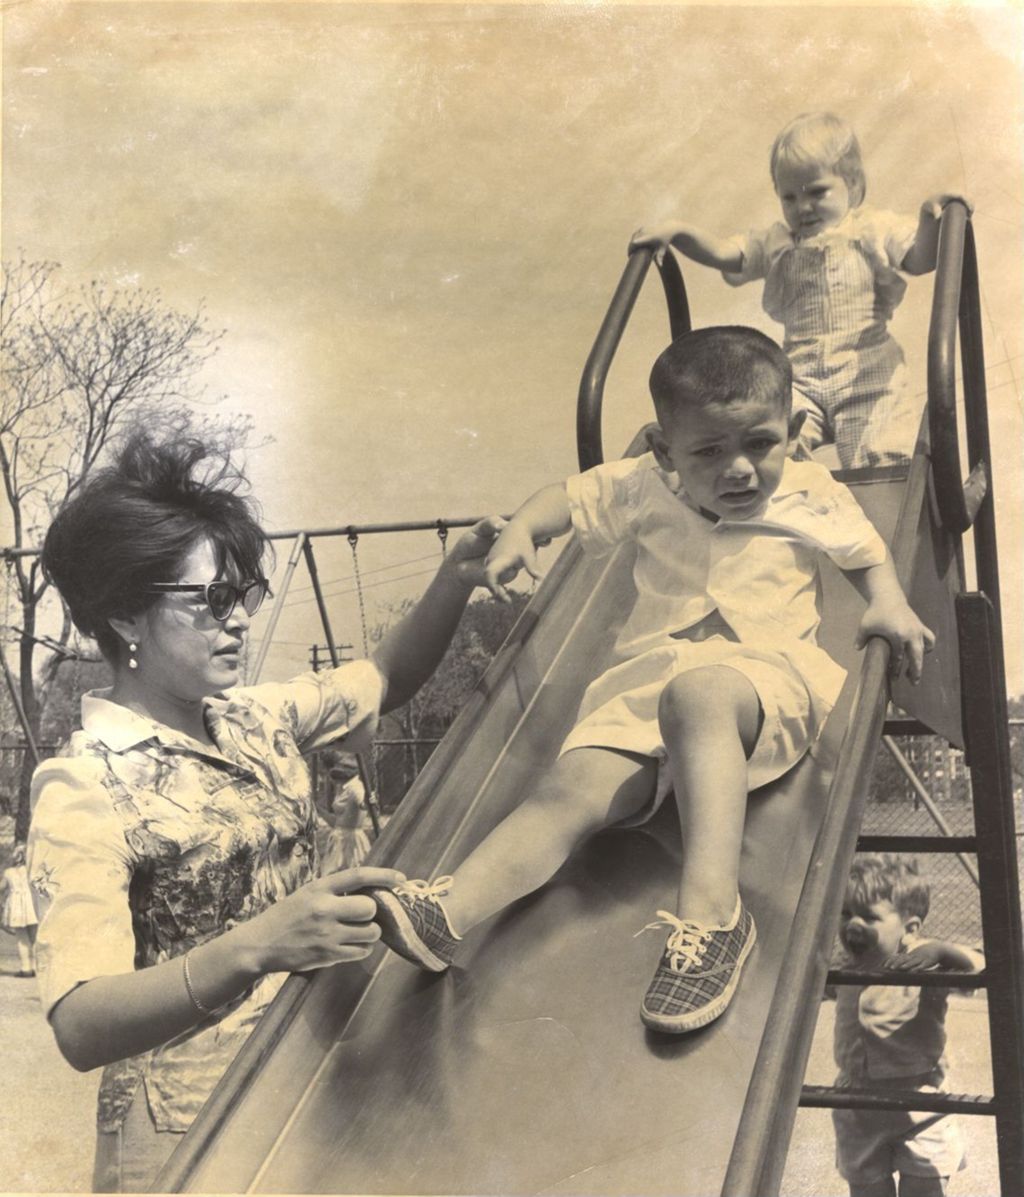 Children playing on a slide with a woman assisting